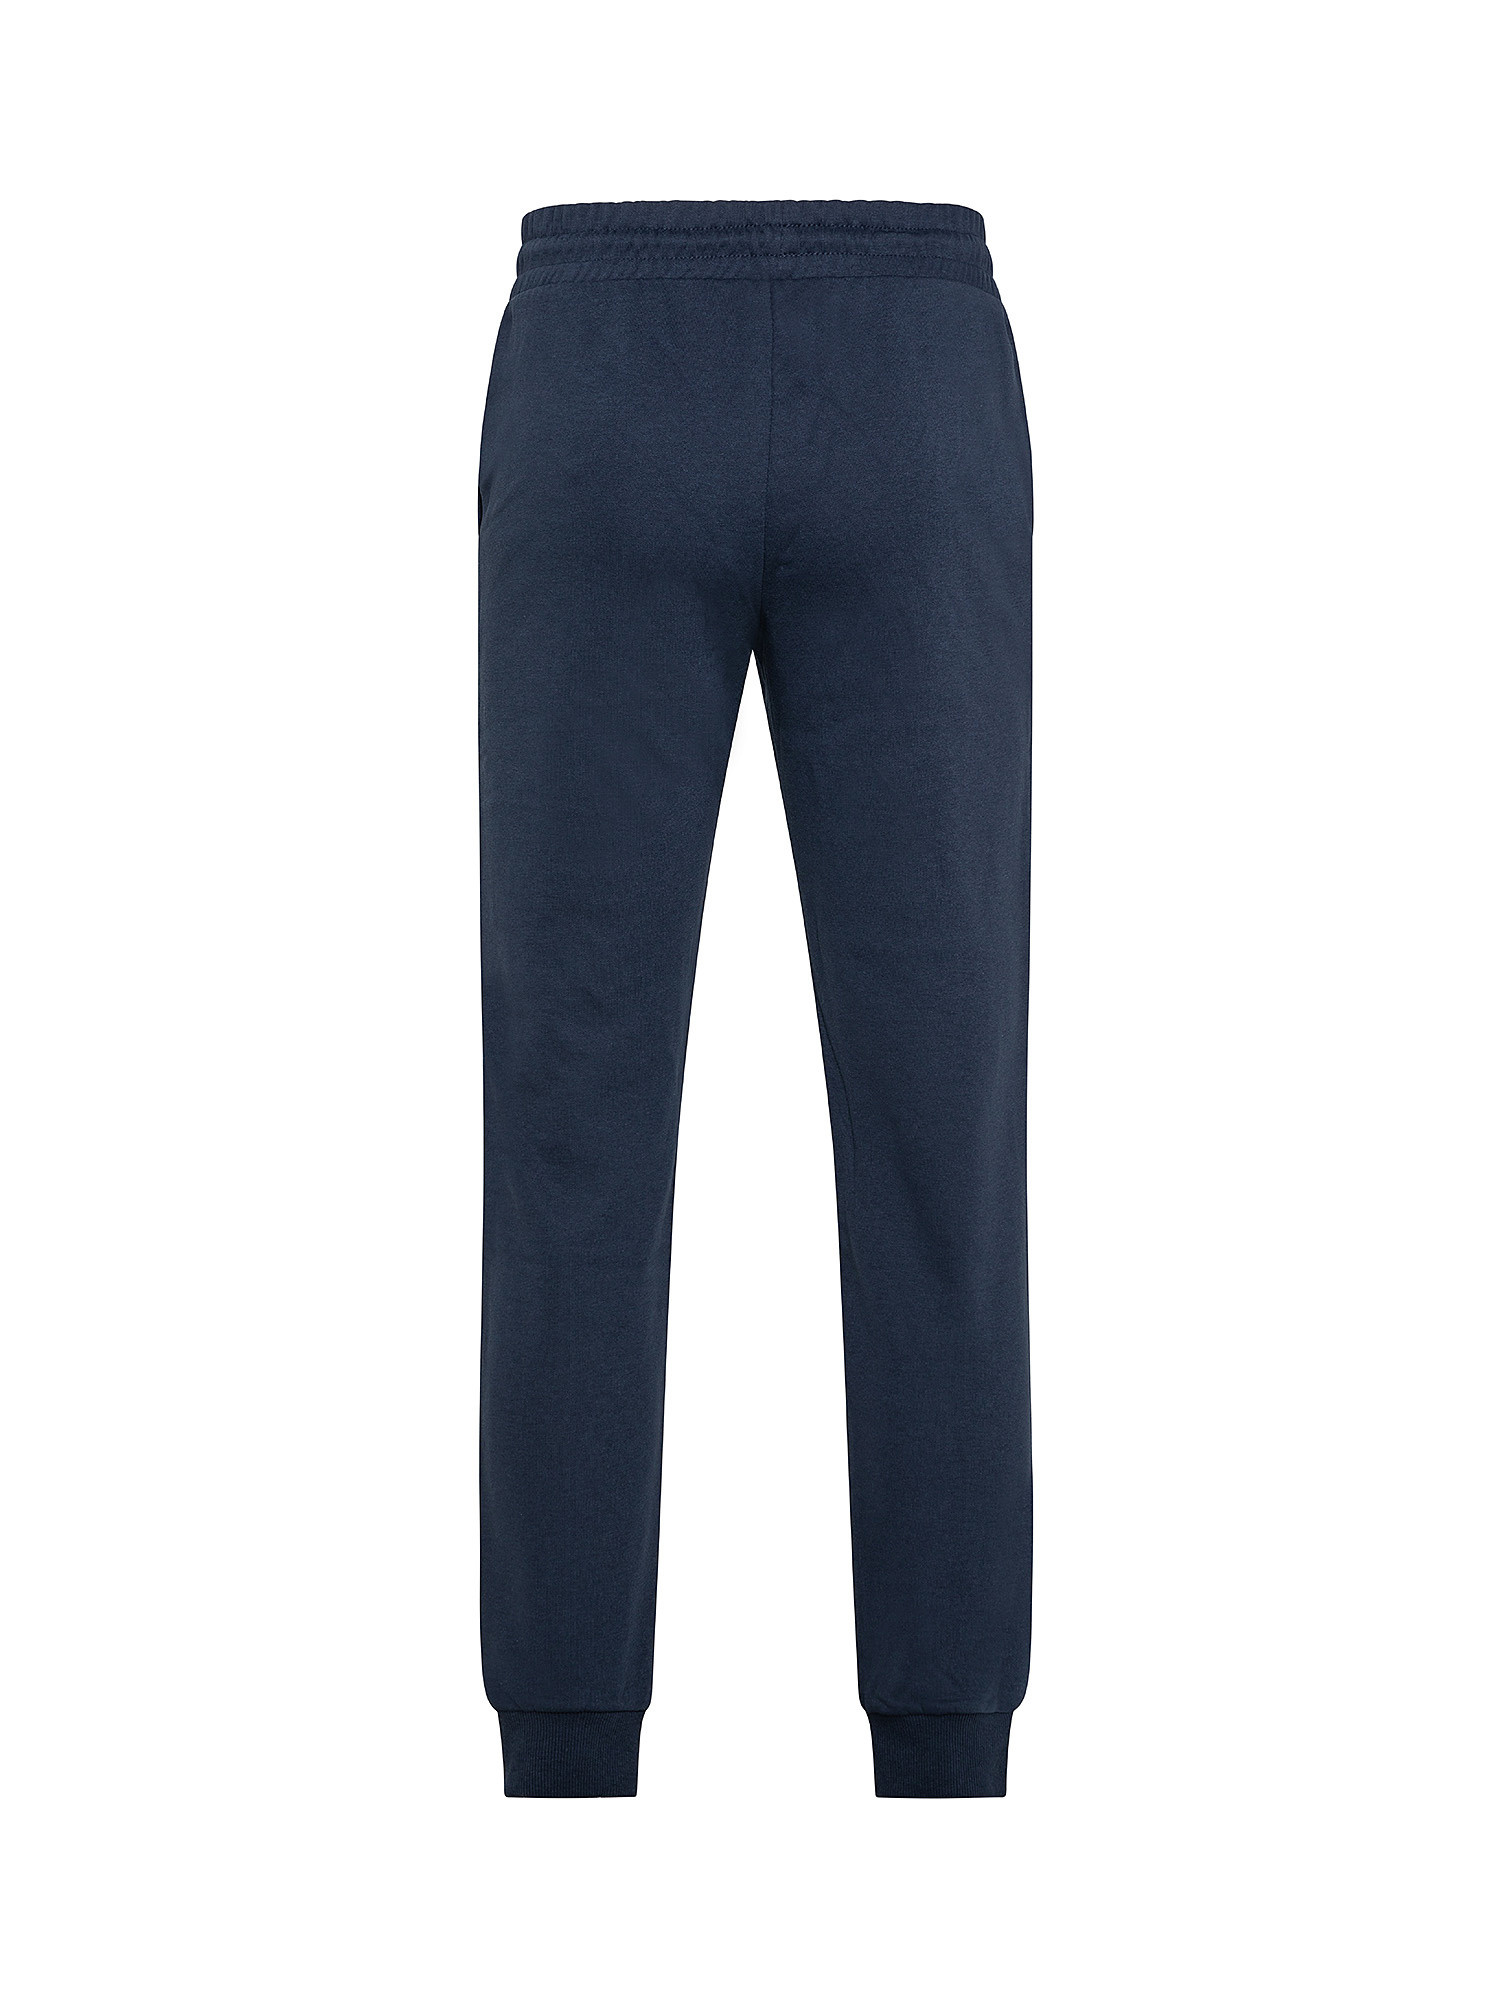 Sweatpants in cotton, Blue, large image number 1